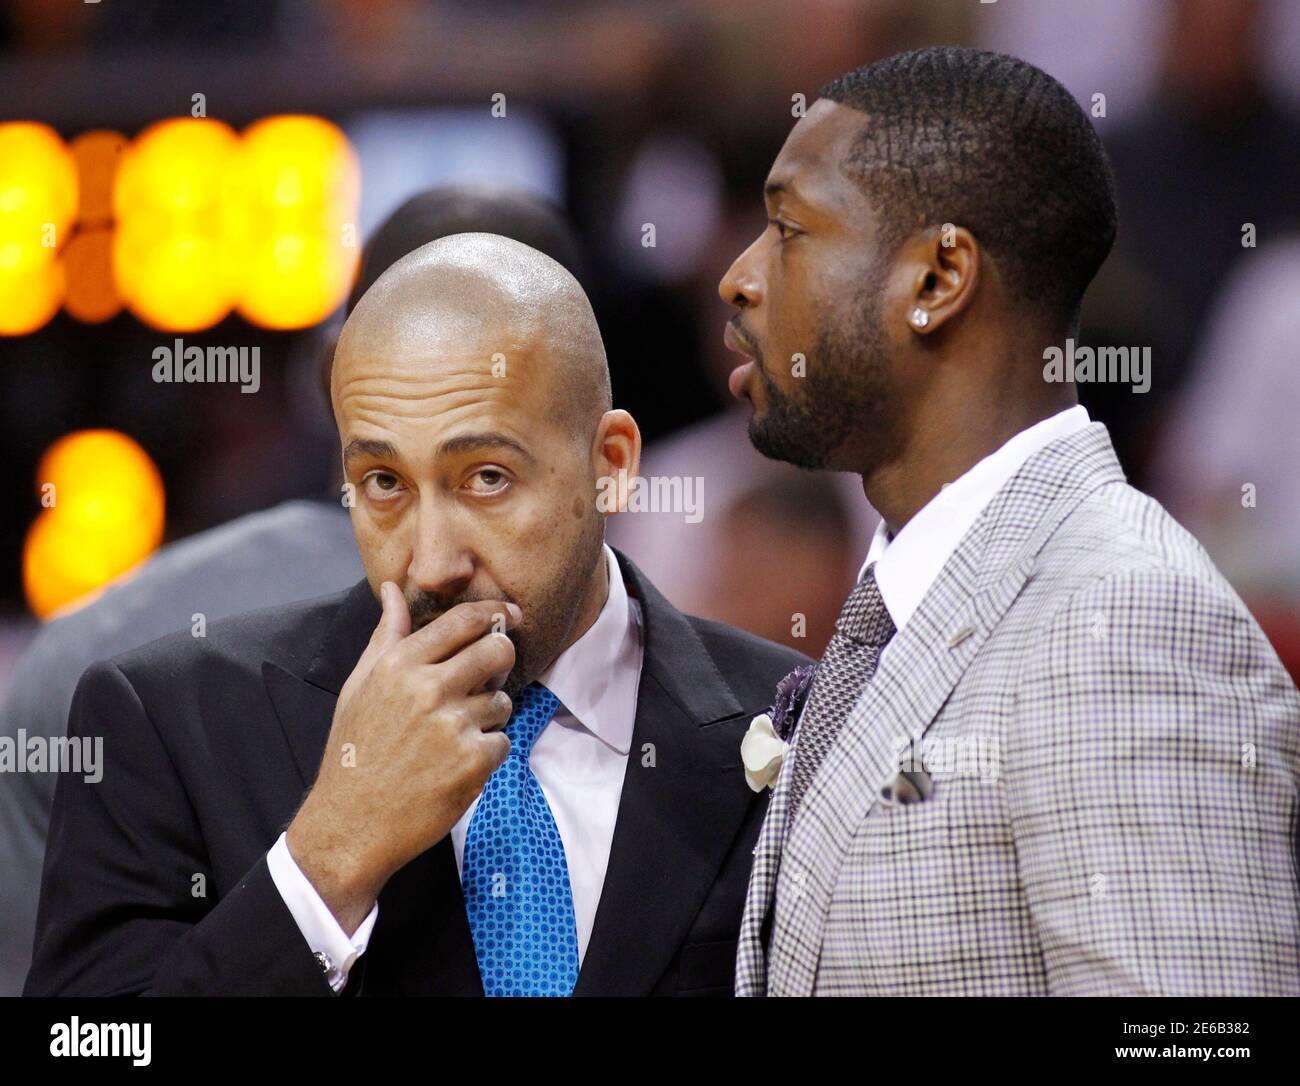 Miami Heat's Dwyane Wade (R) who is injured, speaks with Heat assistant  coach David Fizdale during a time-out as the Heat faced the Cleveland  Cavaliers in their NBA basketball game in Miami,